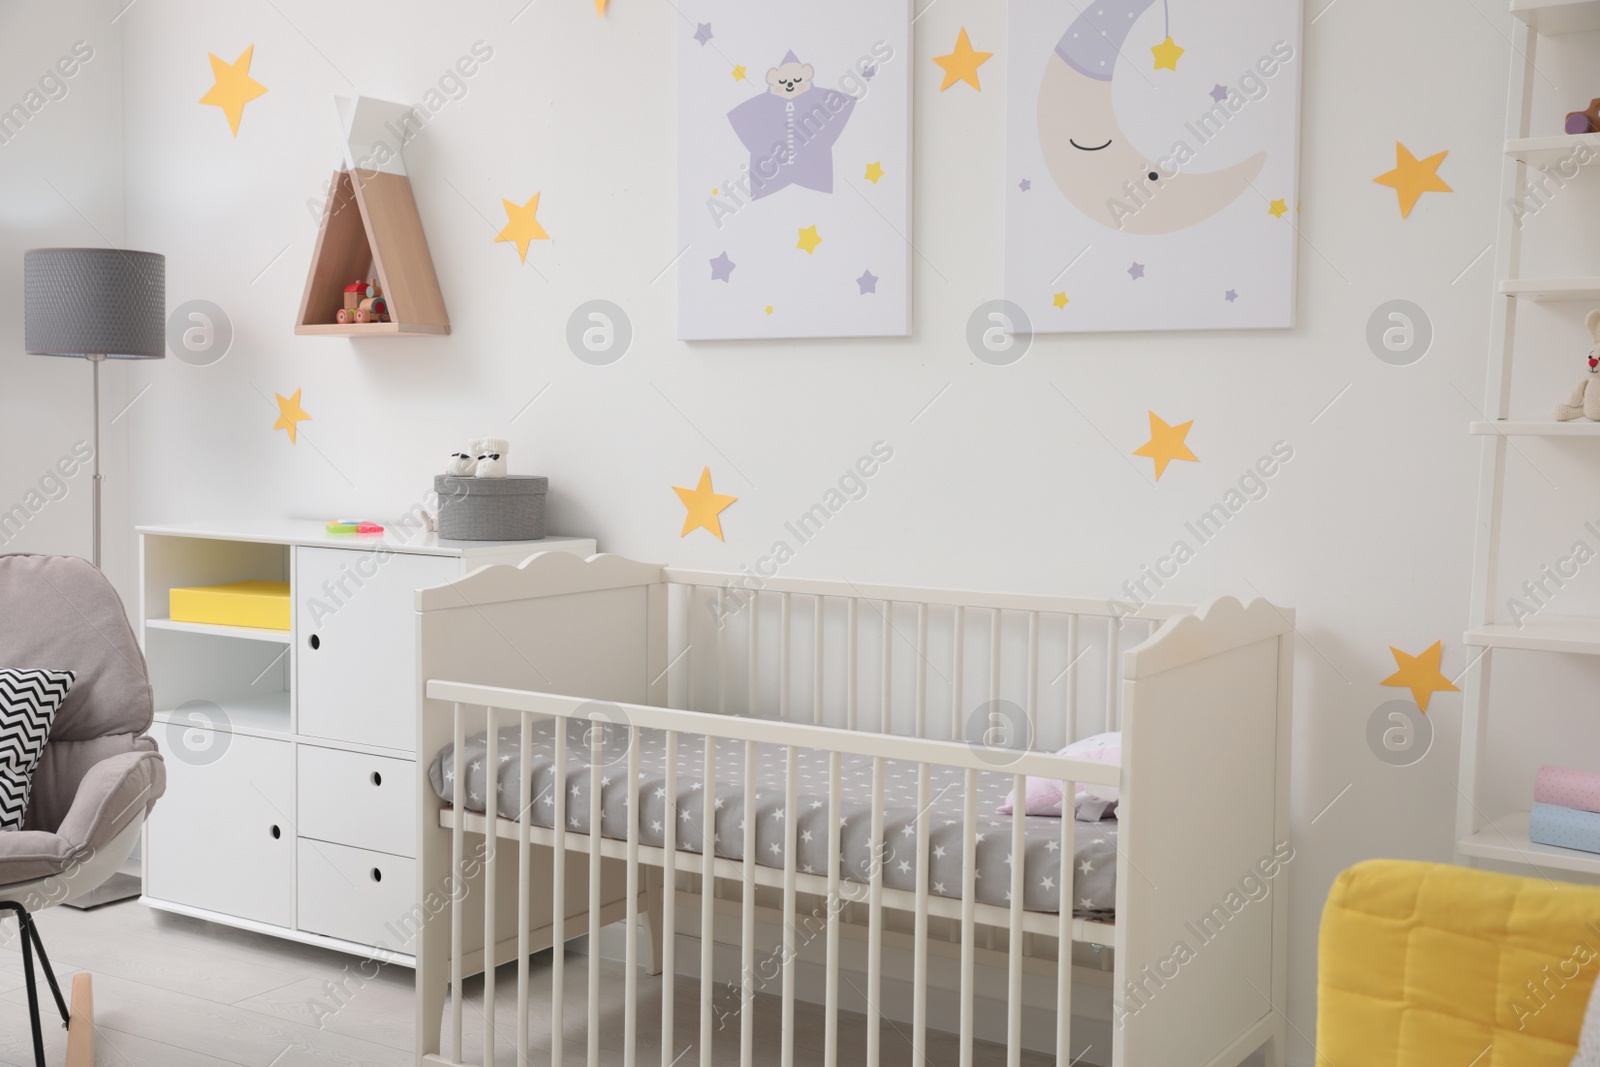 Photo of Stylish baby room interior with crib and decor elements